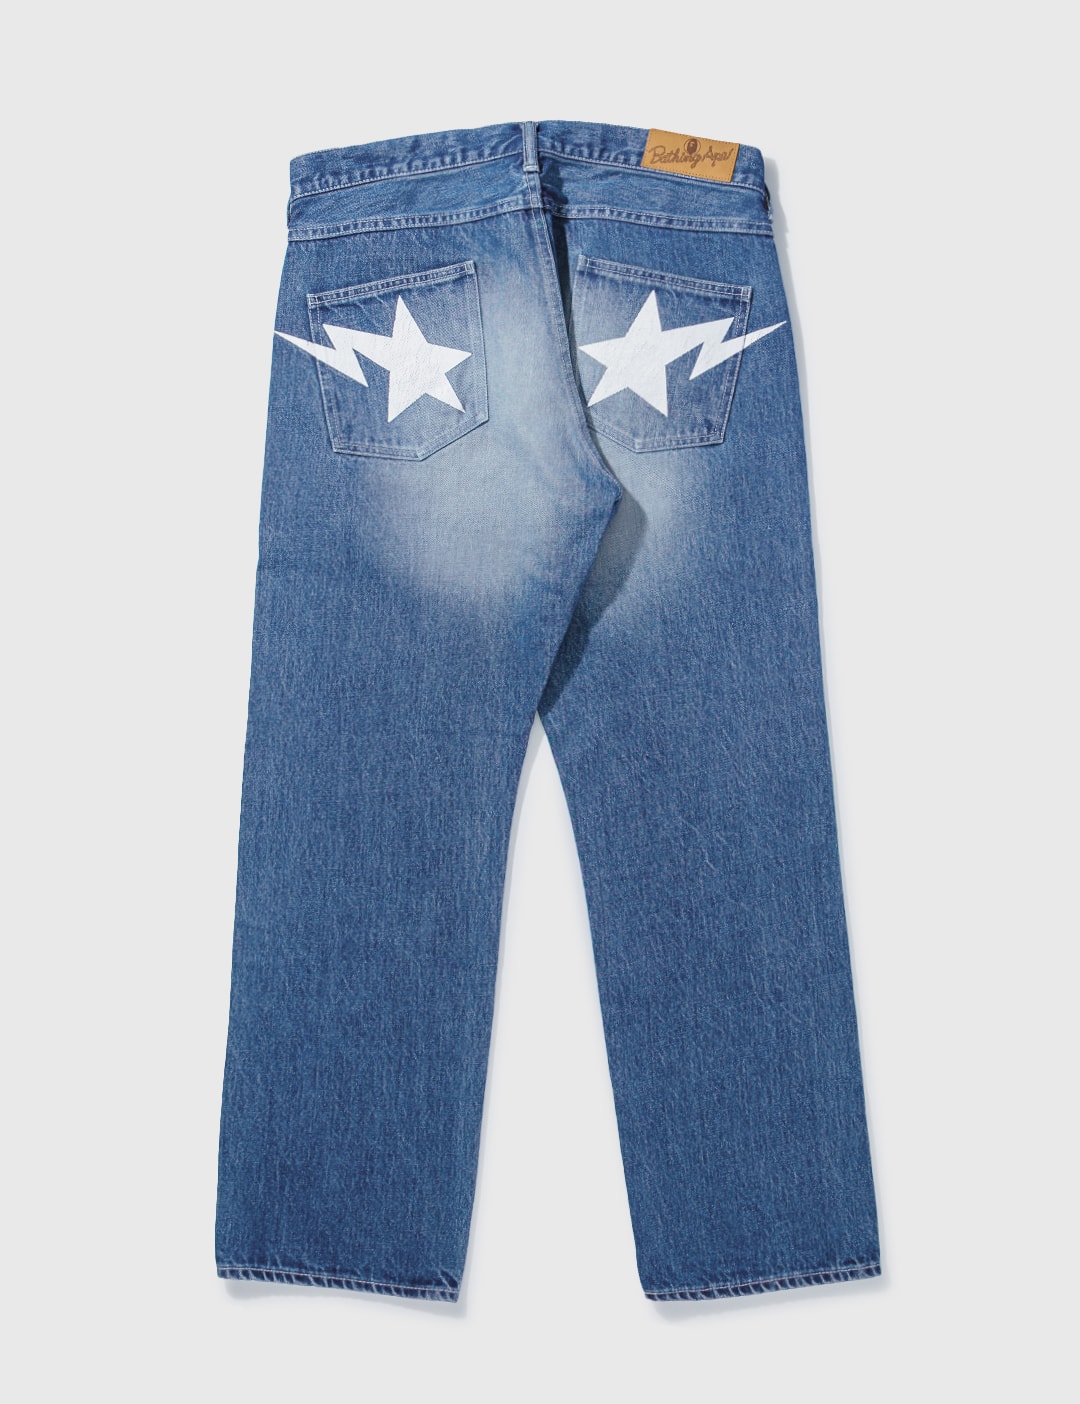 BAPE - A BATHING APE STAR JEANS | HBX - Globally Curated and Lifestyle